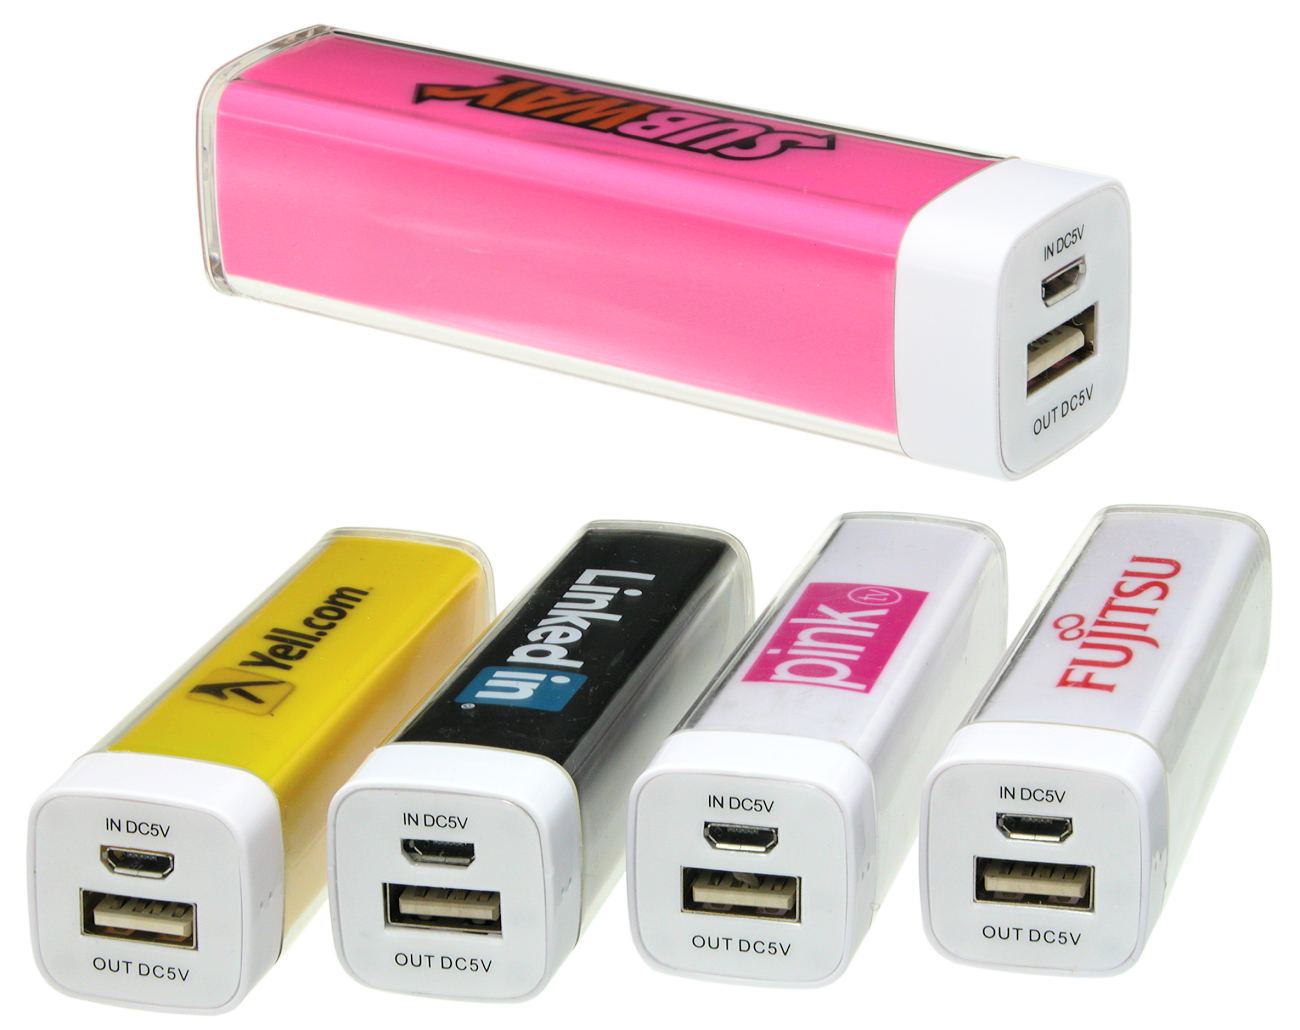 Five lipstick style power banks in various colours and logo print